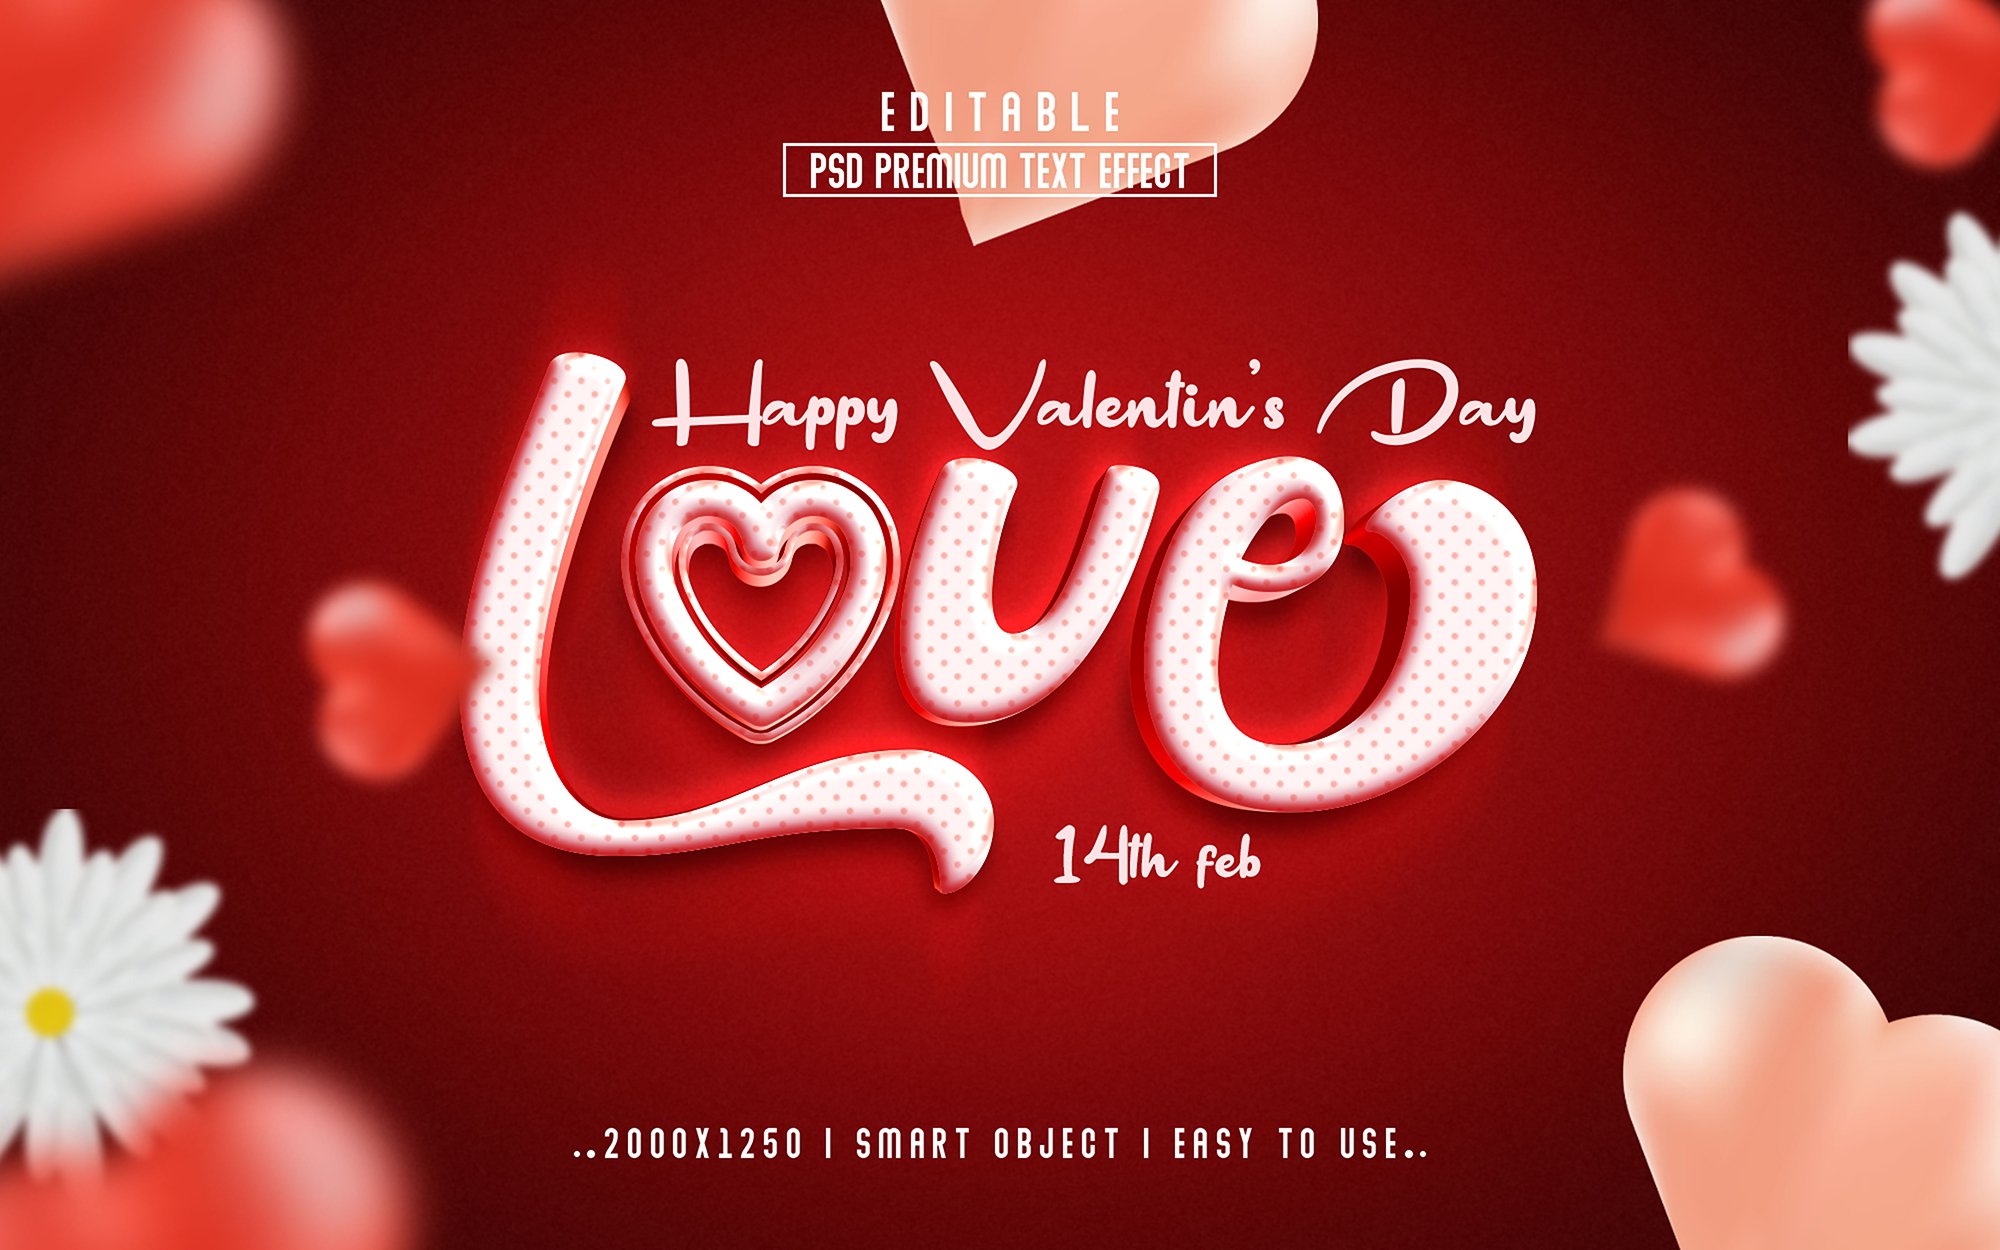 Valentine's Day 3D Editable Textcover image.